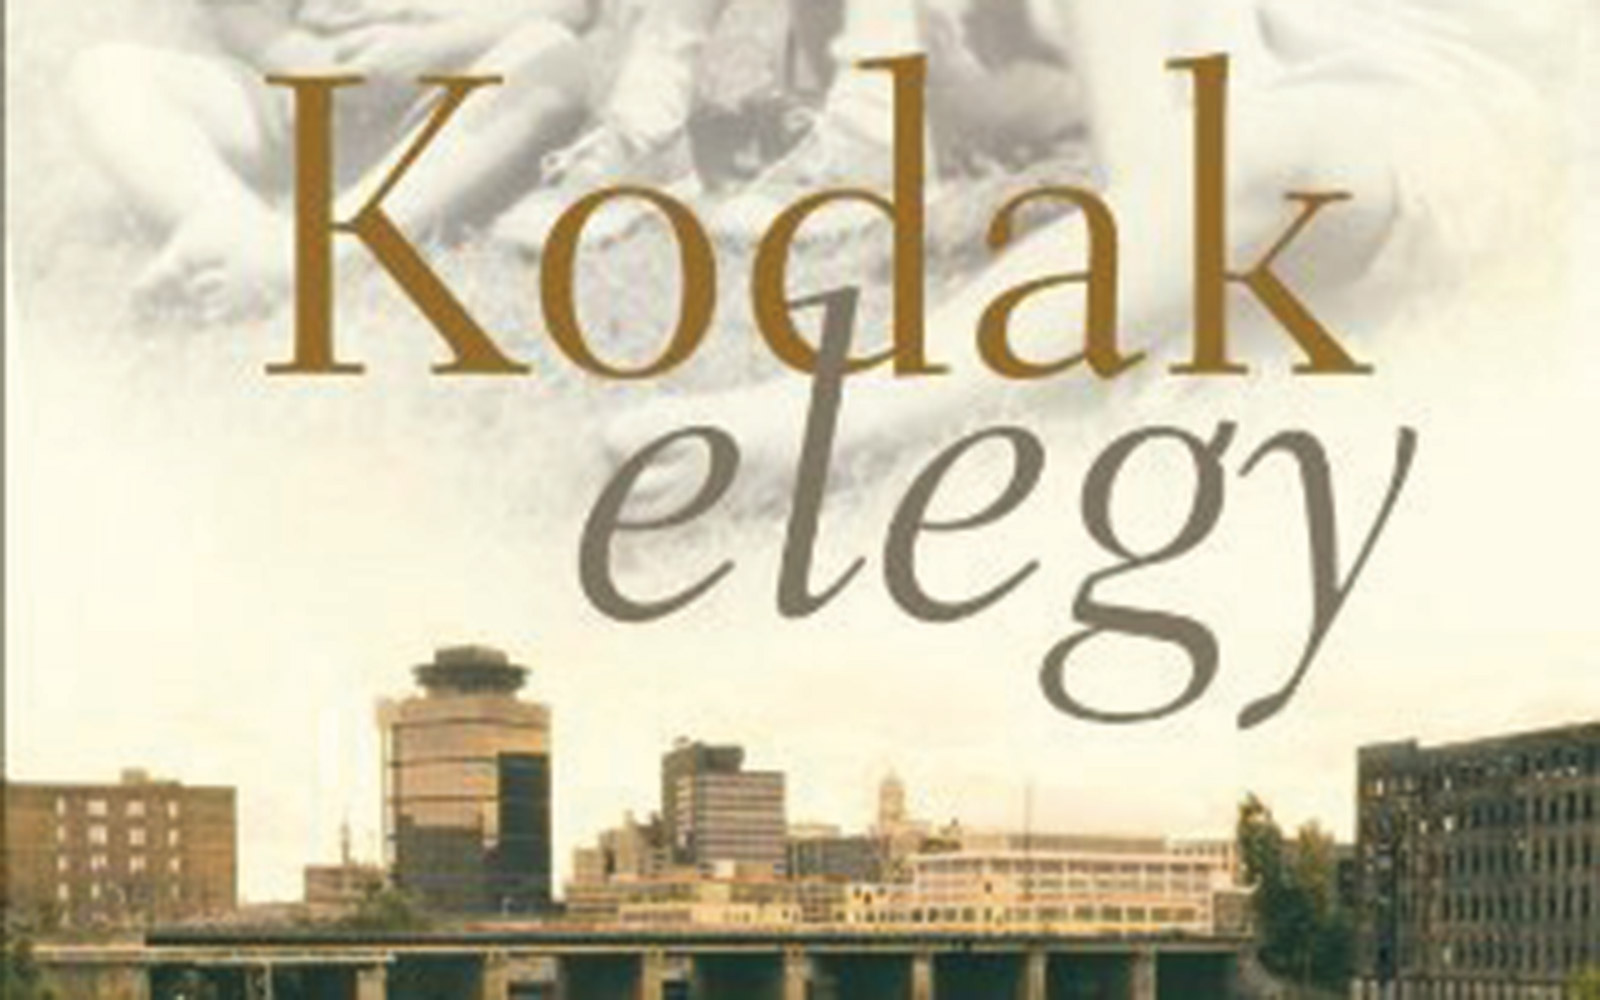 About the book: Kodak Elegy documents Decker's coming-of-age story and the ways in which he confronted a complex world beyond his home in the Rochester, N.Y., suburbs.